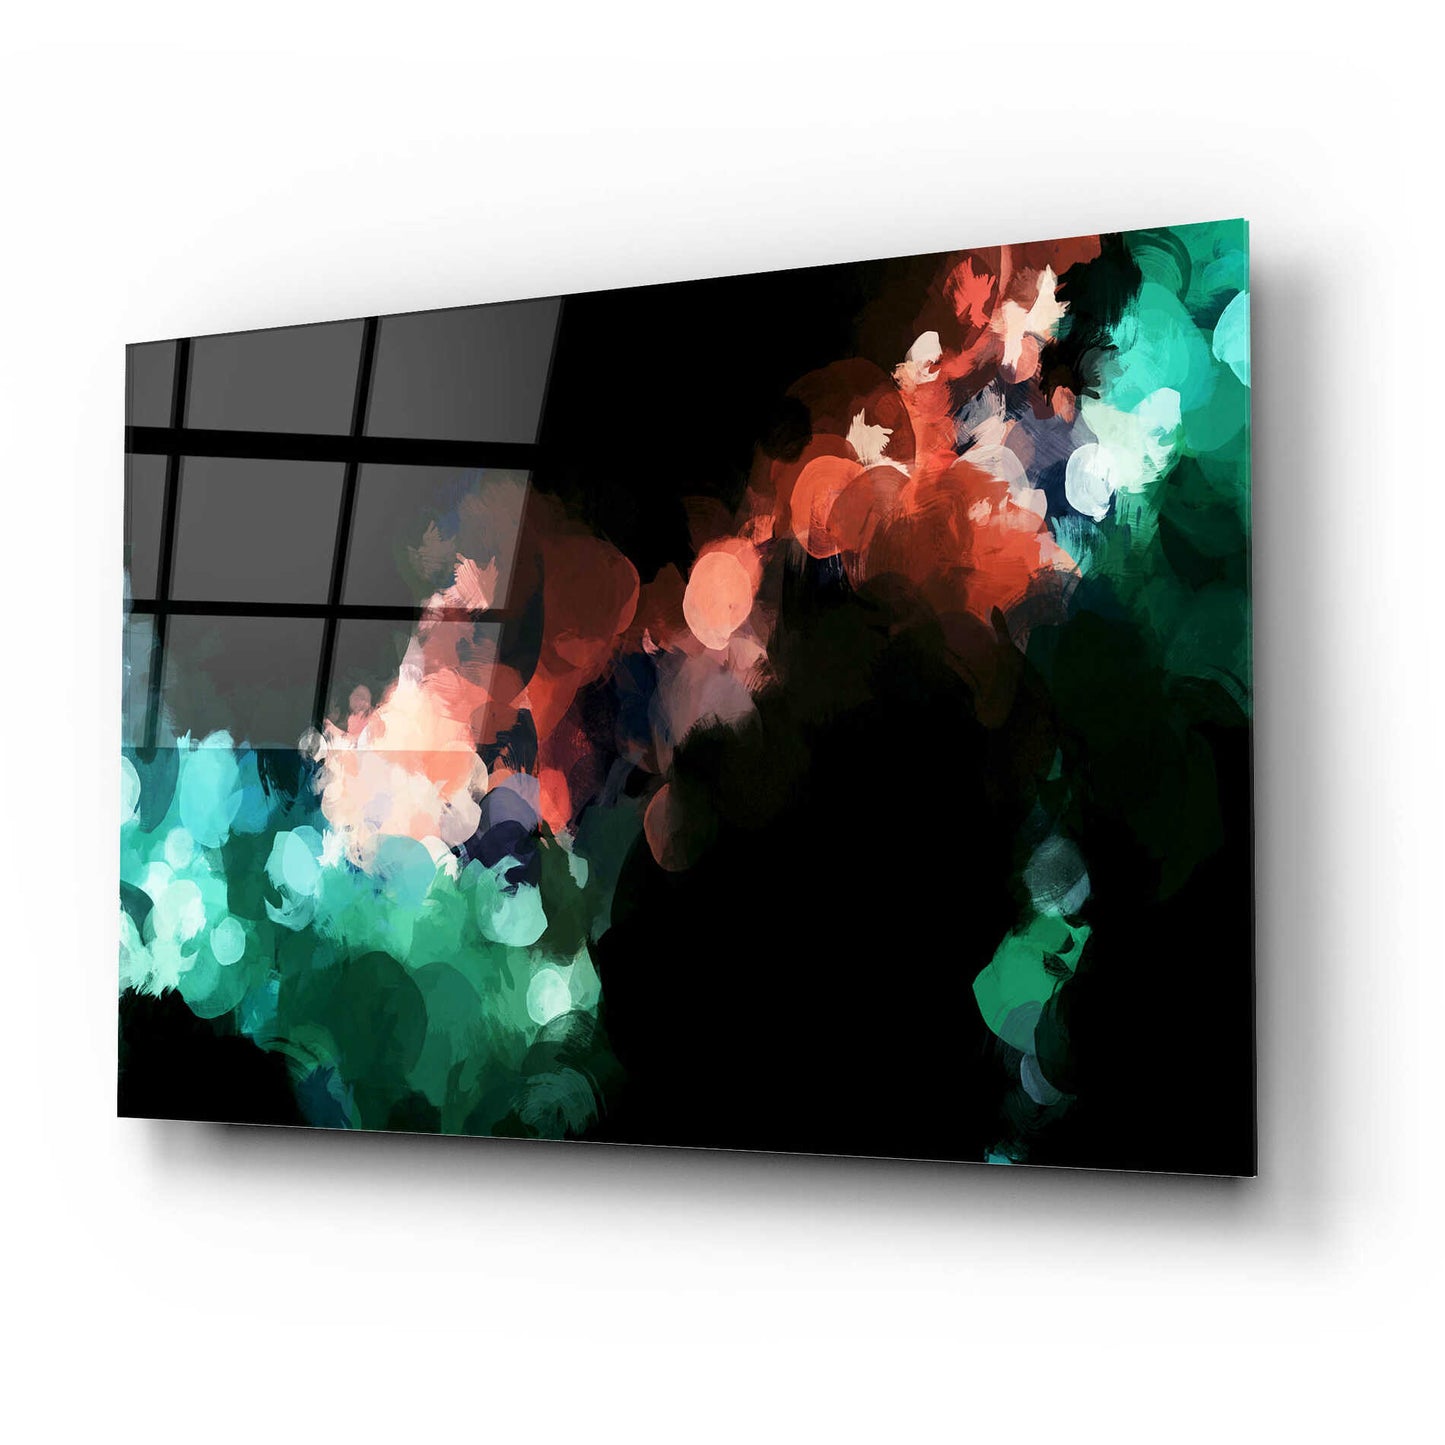 Epic Art 'Inverted Abstract Colorful Flows 17' by Irena Orlov Acrylic Glass Wall Art,24x16